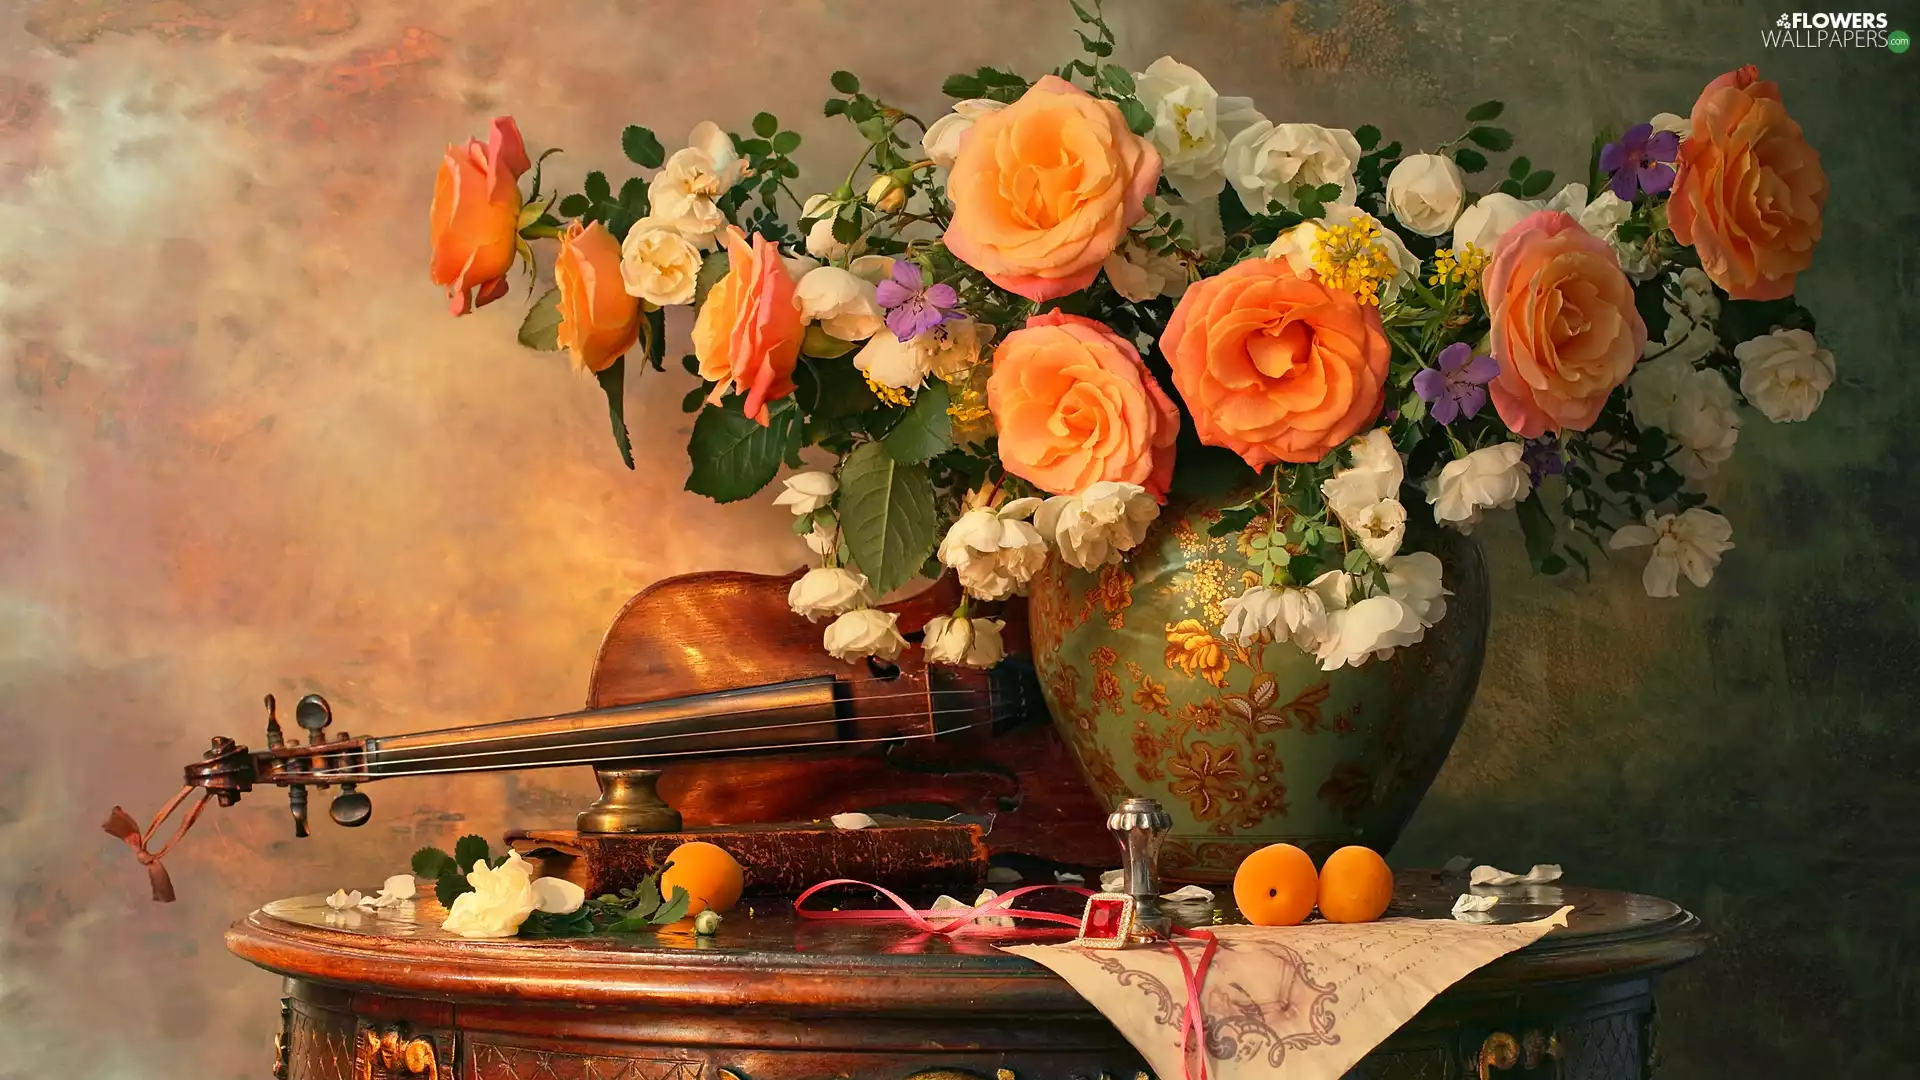 Vase, composition, apricots, table, violin, roses